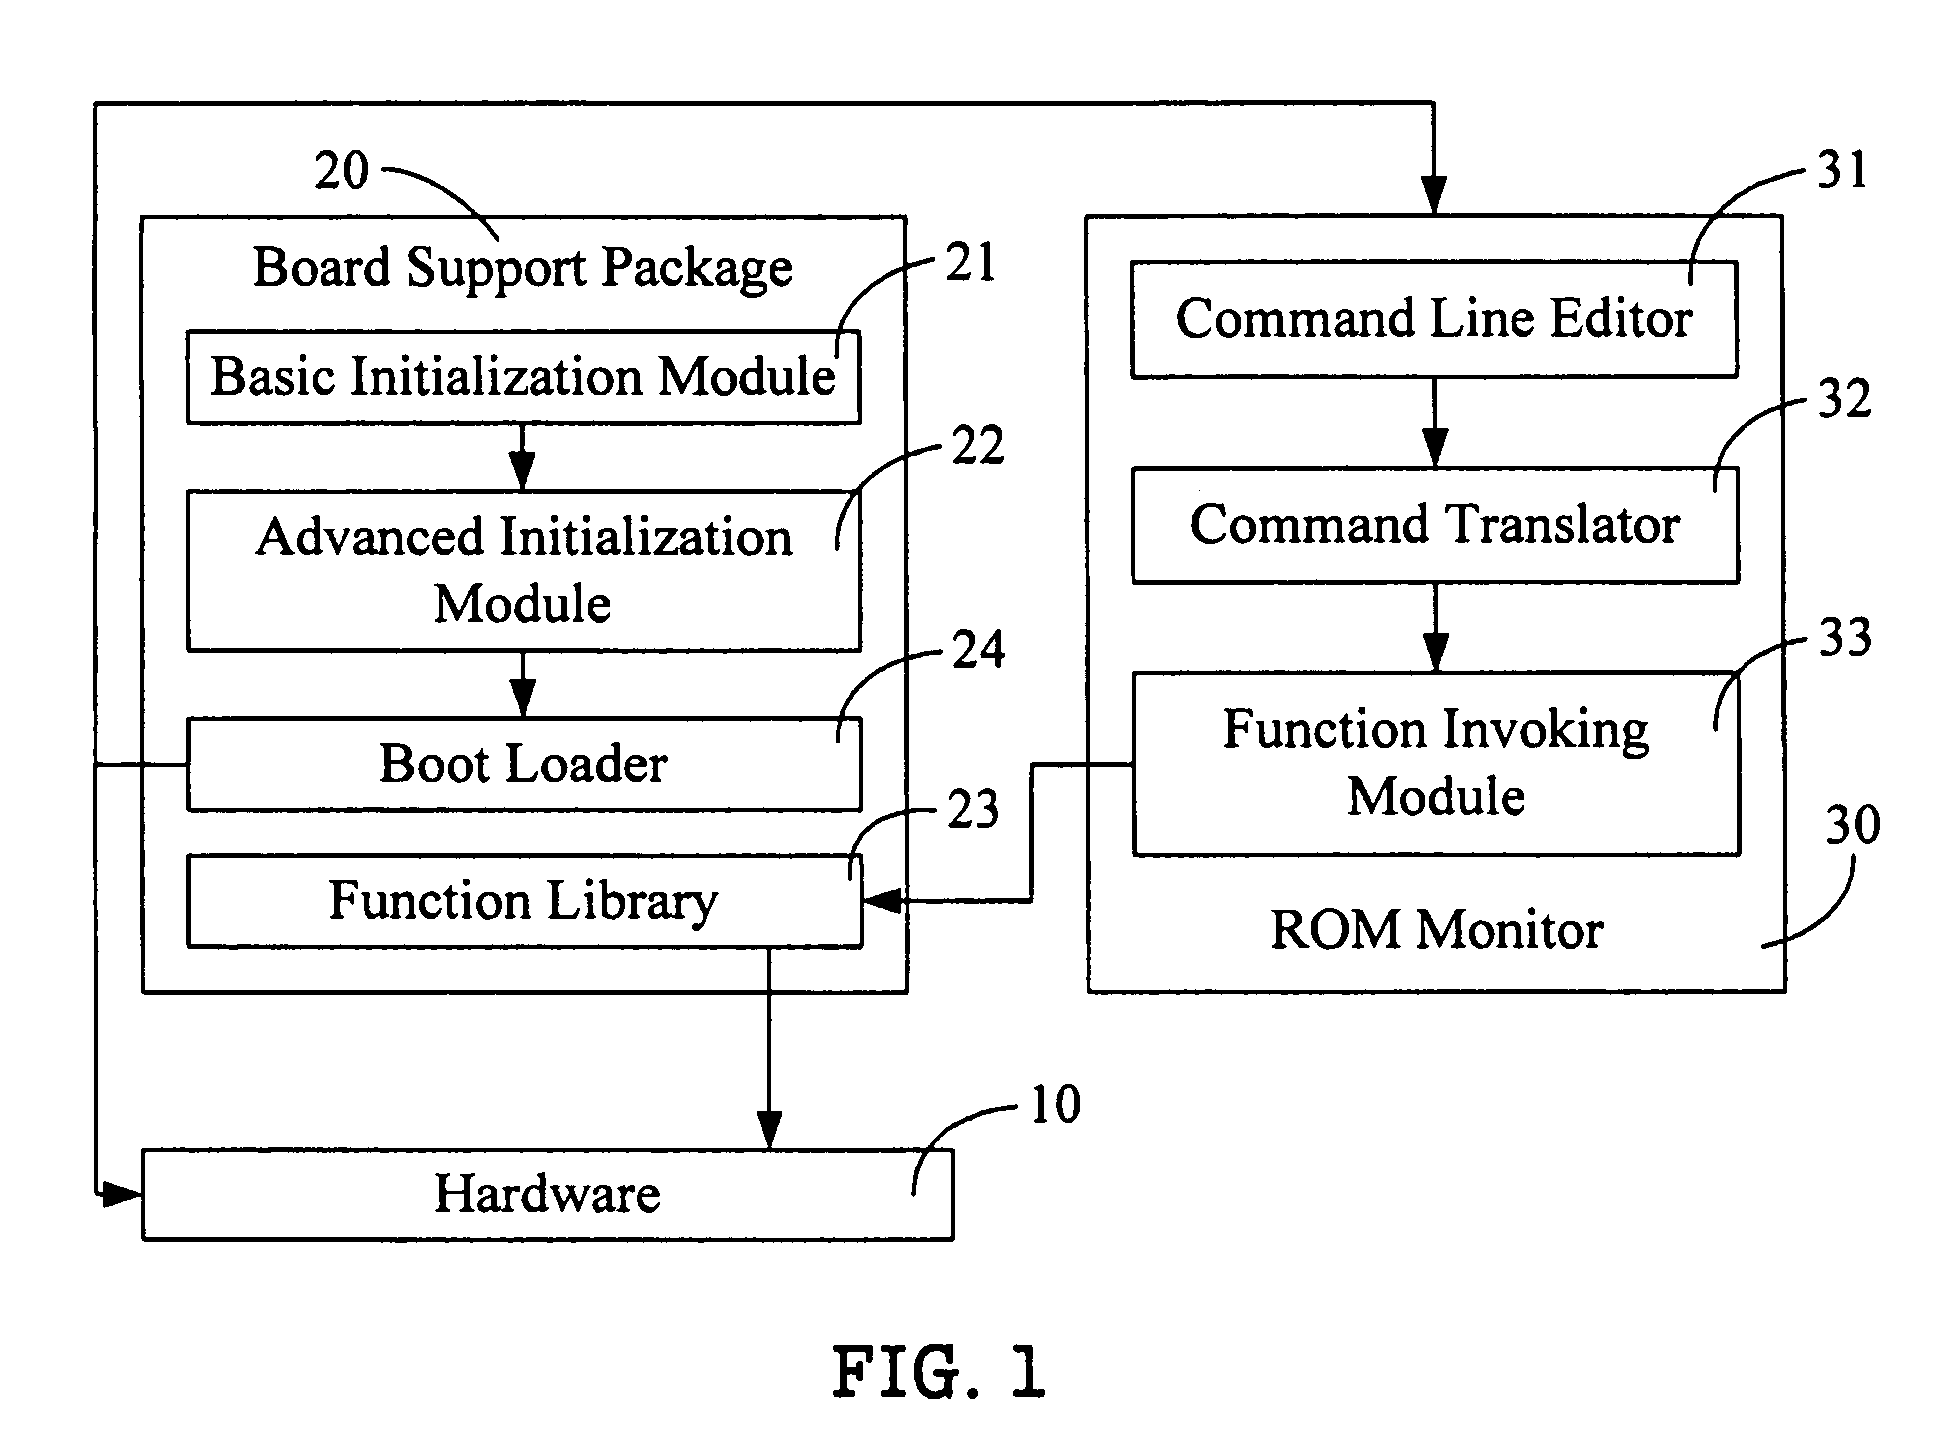 System and method for initializing hardware coupled to a computer system based on a board support package (BSP)